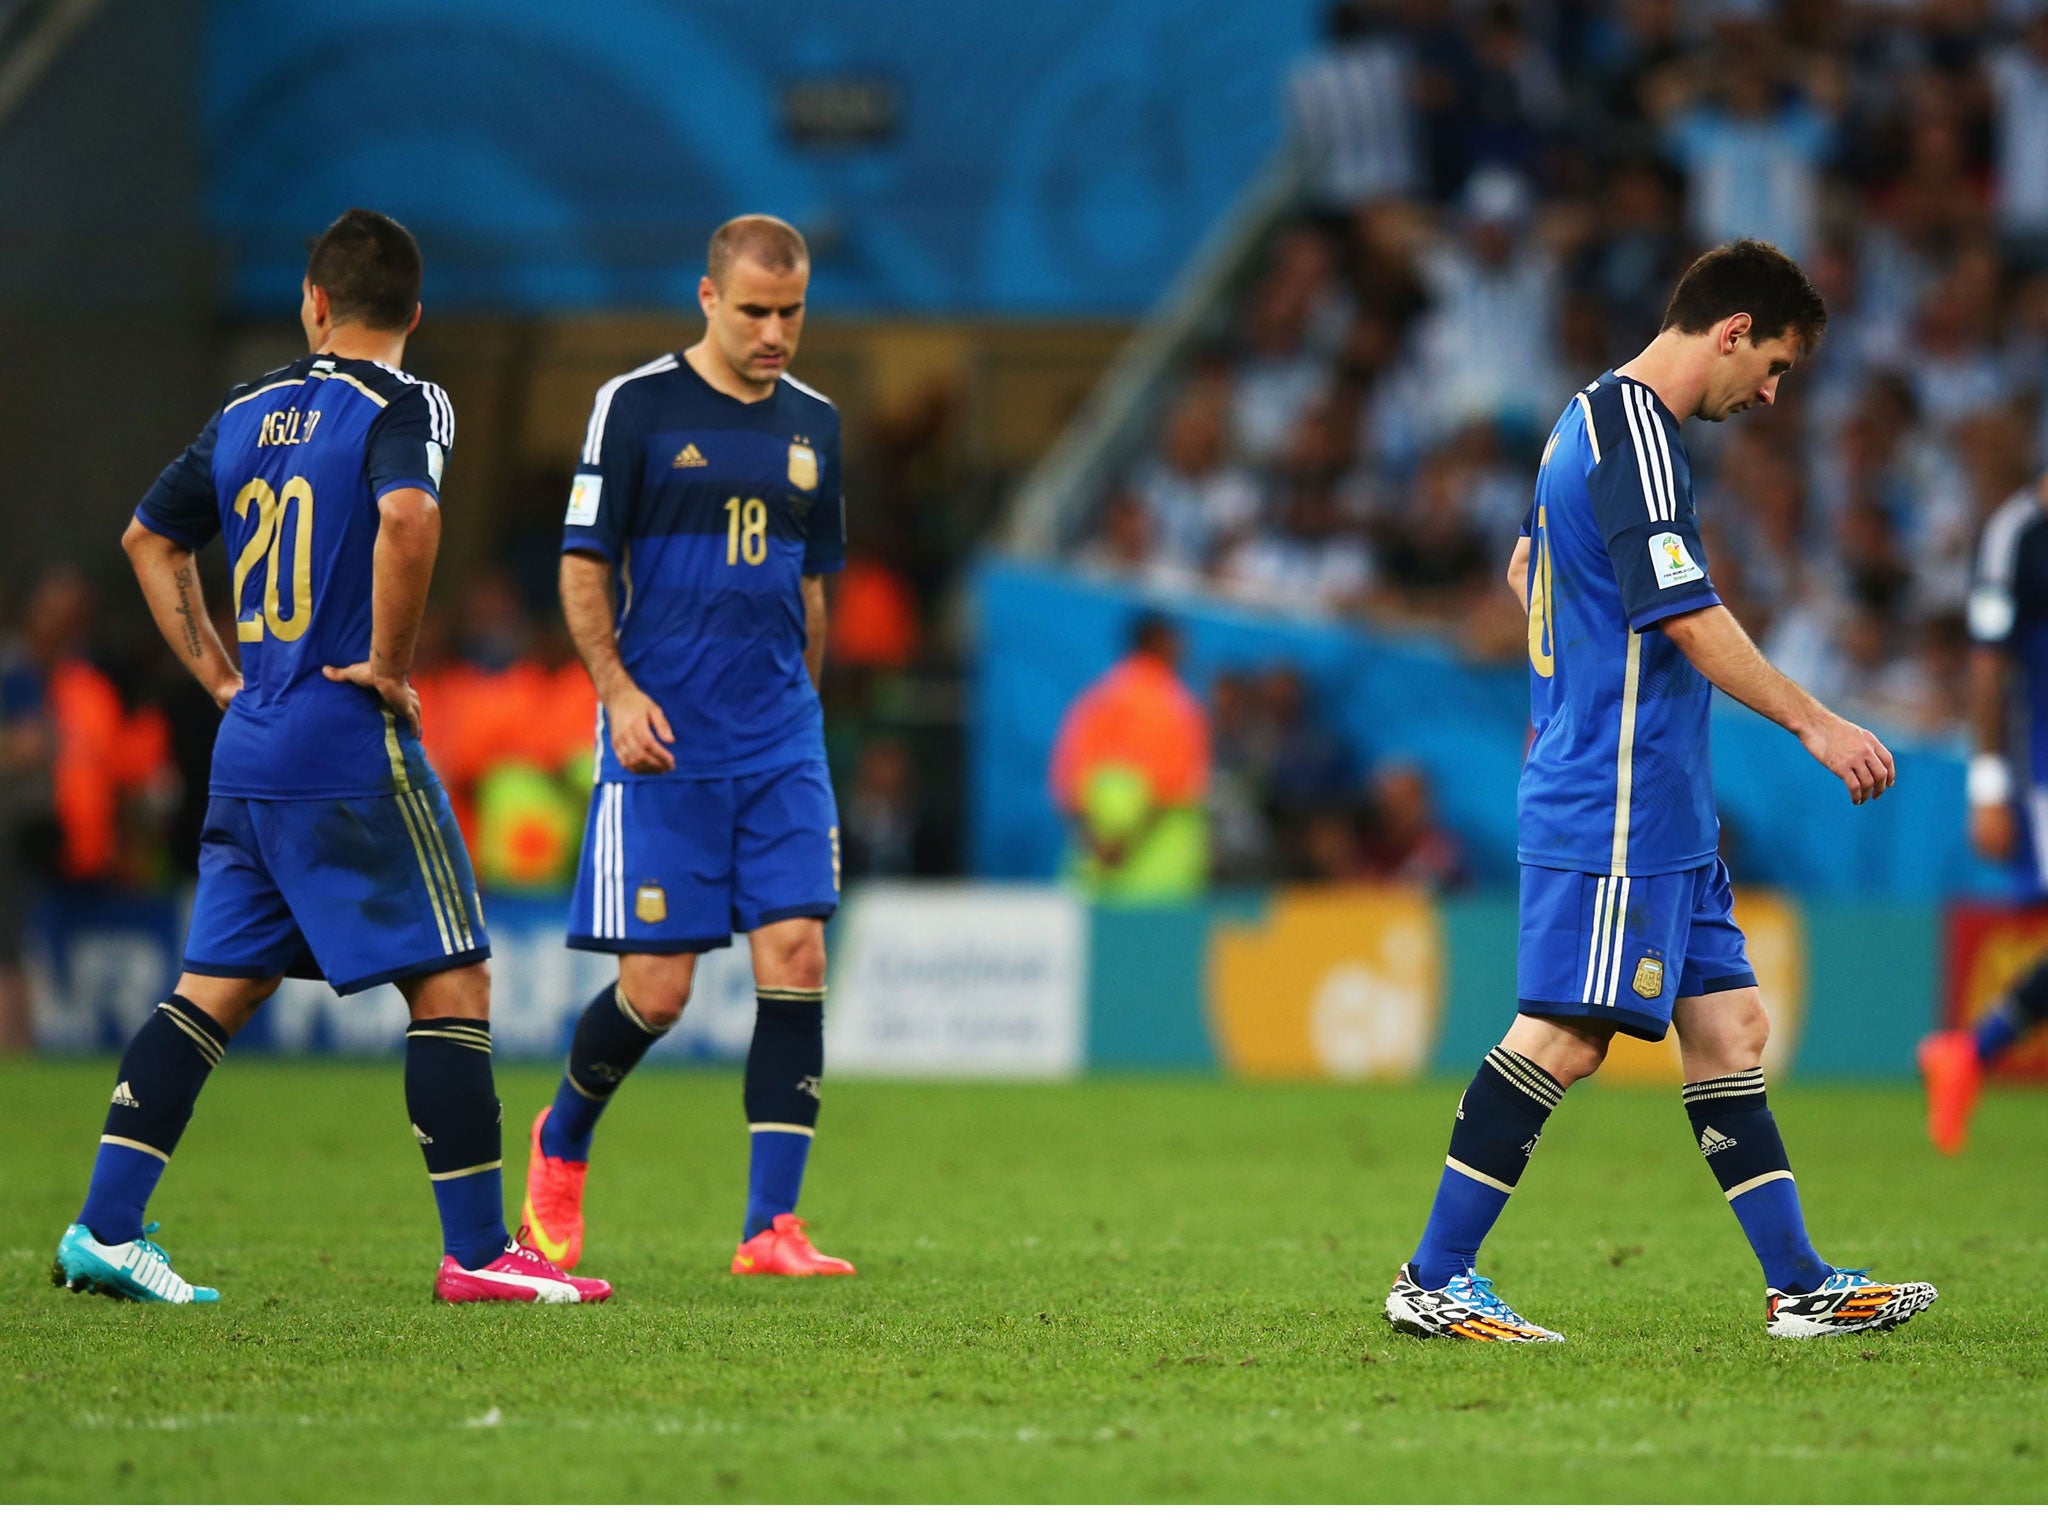 Lionel Messi, Sergio Aguero and Rodrigo Palacio trudge after the pitch after the World Cup final